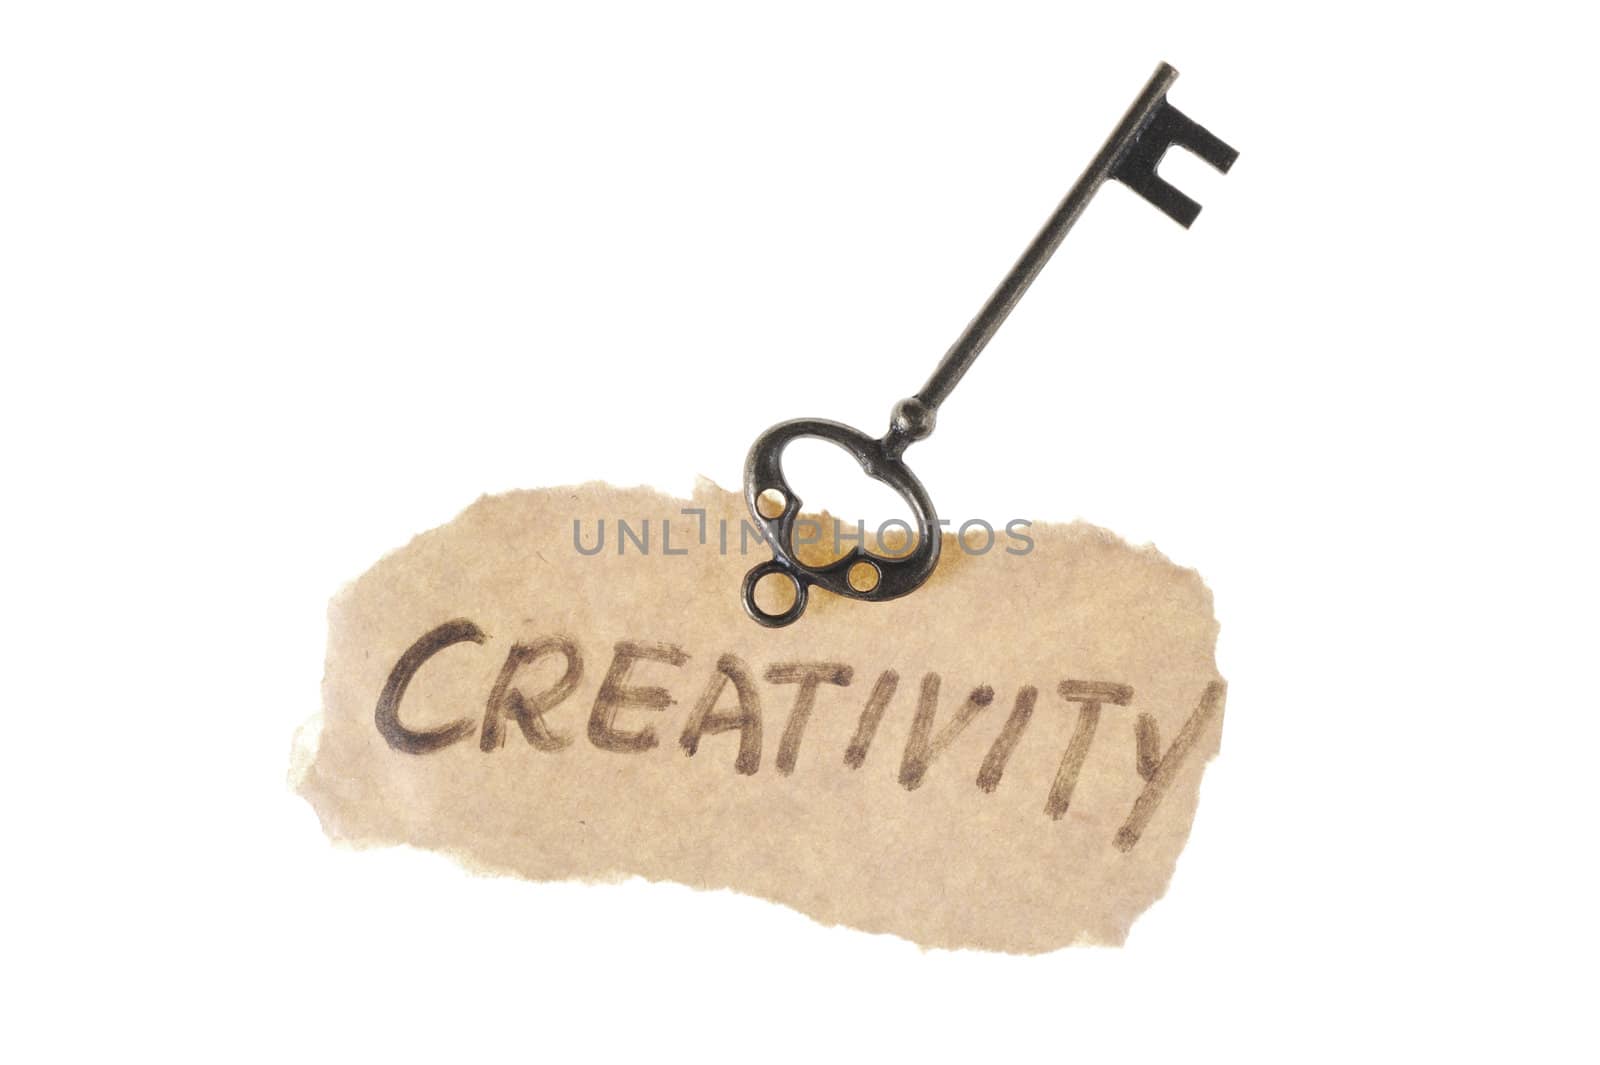 Old key and creativity word by raywoo